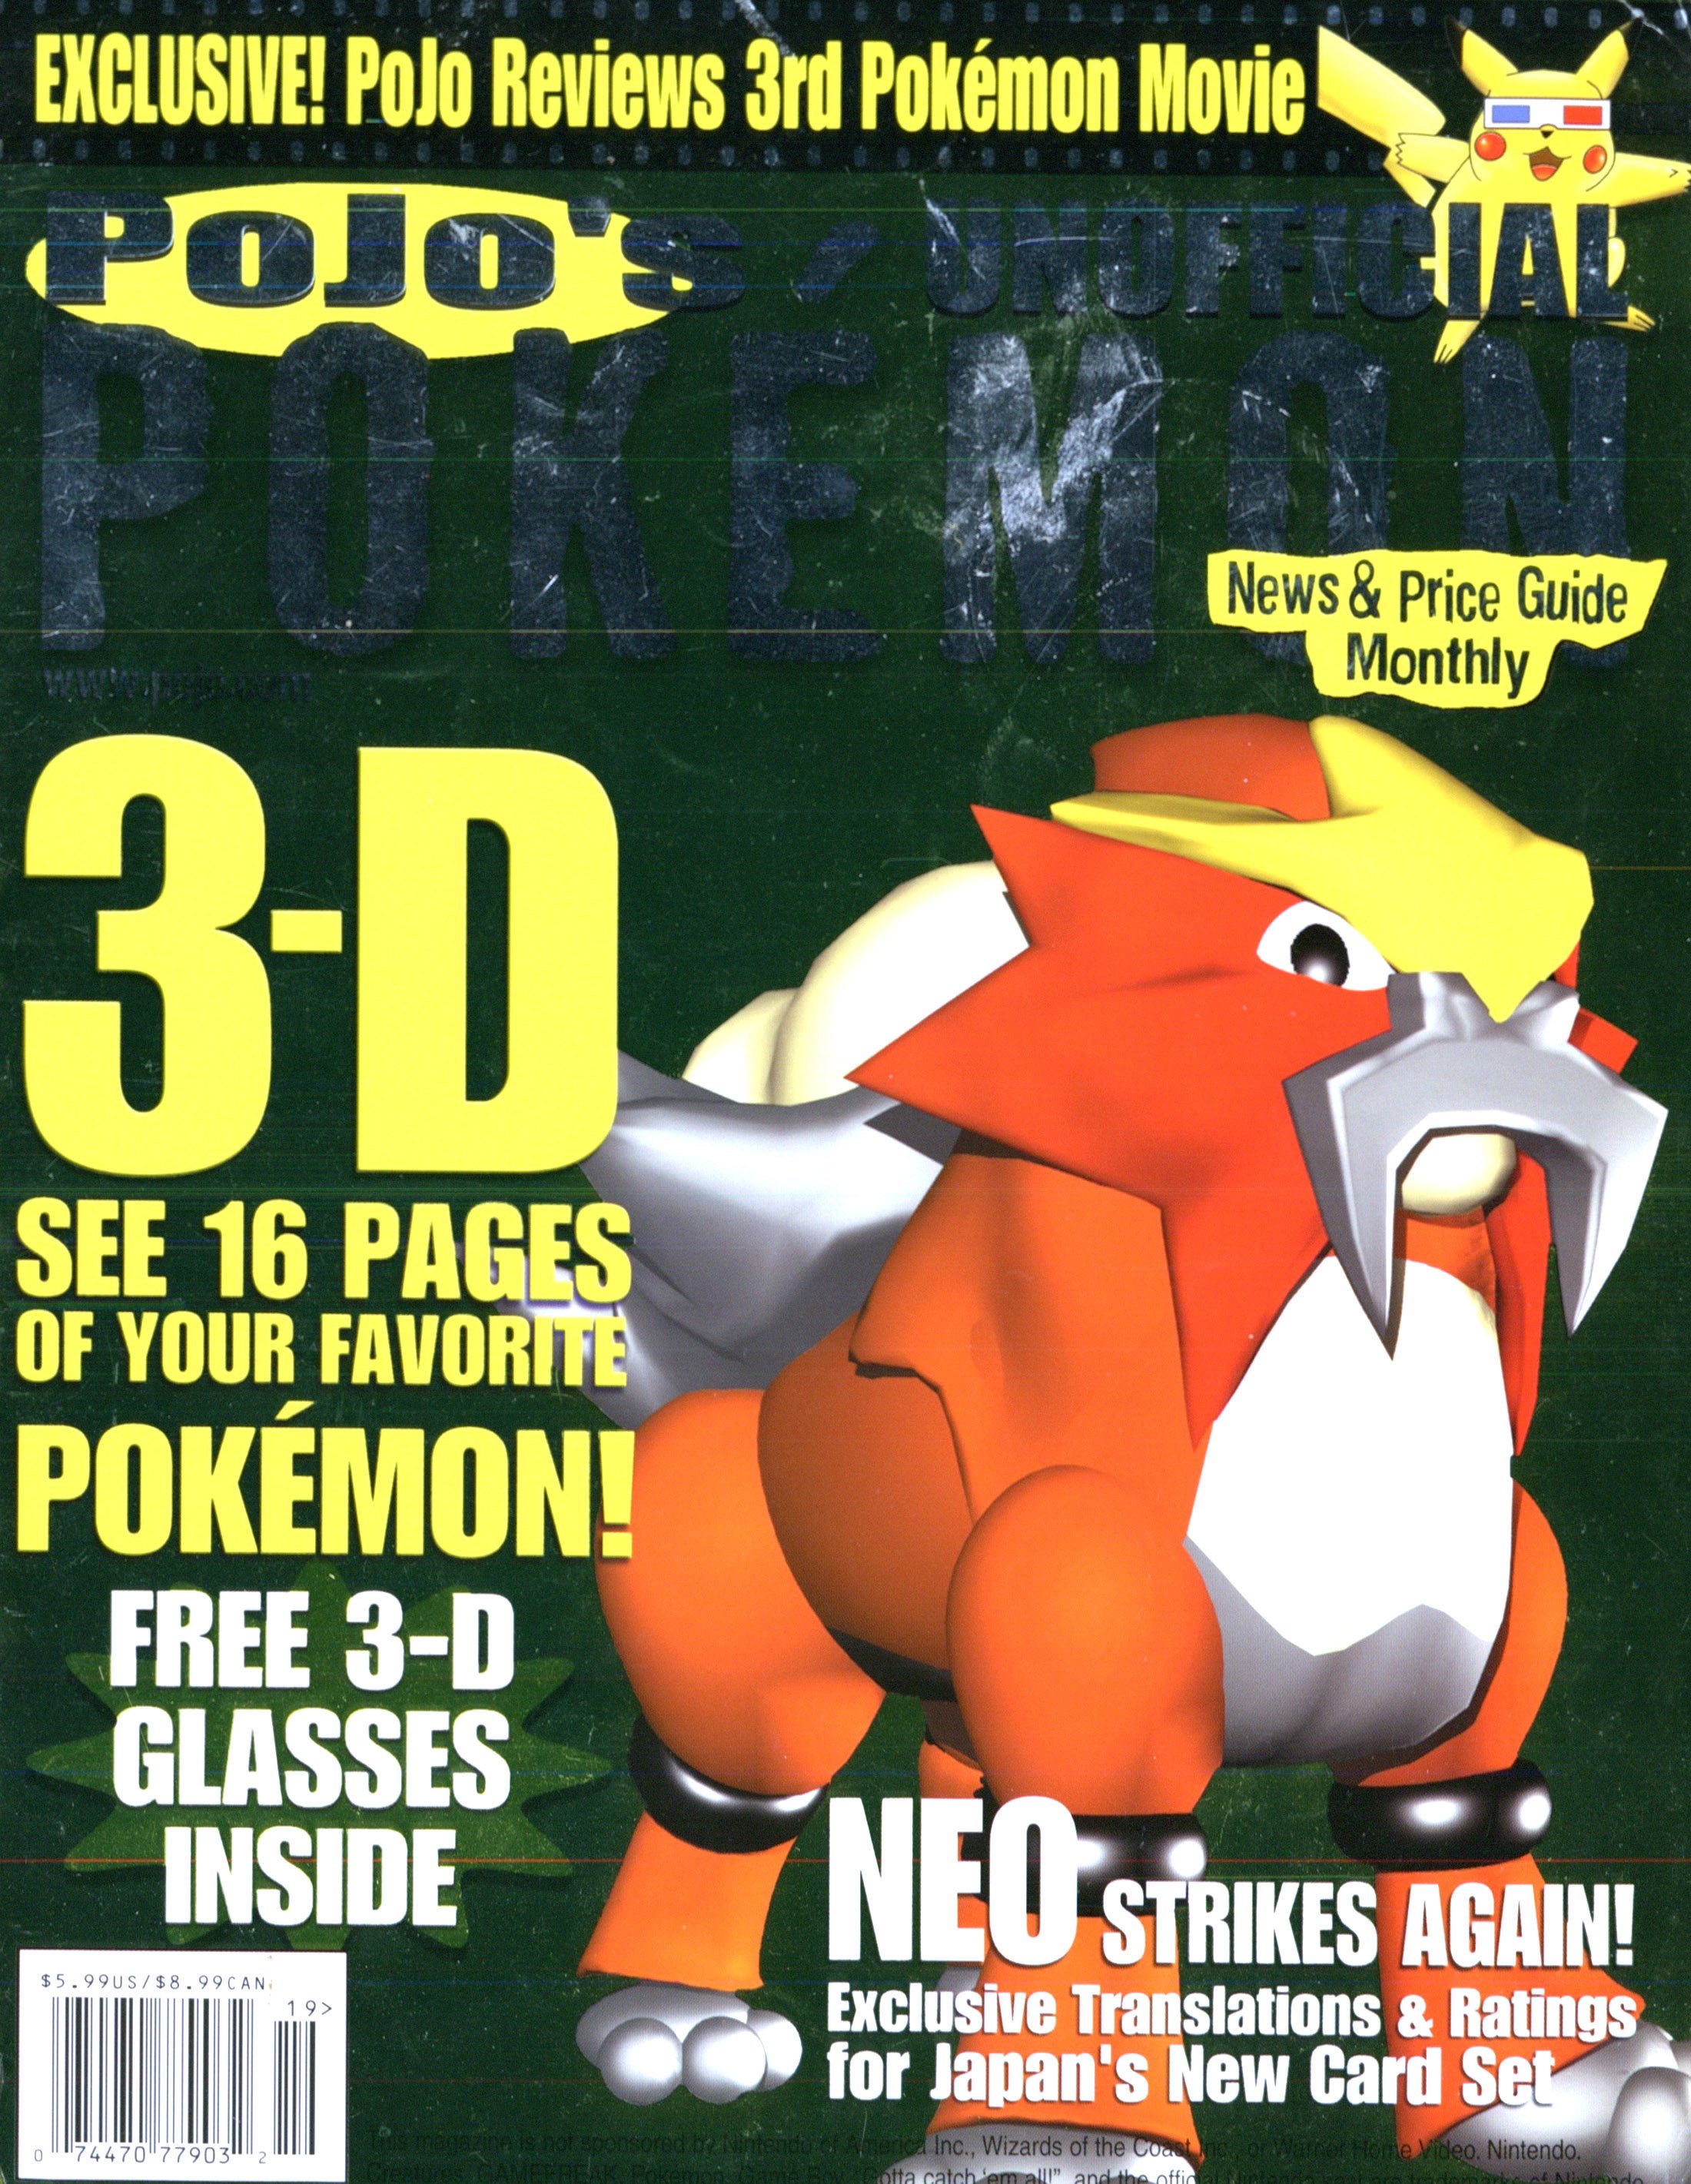 PoJo's Unofficial Pokémon News & Price Guide Monthly Issue 012 (October 2000)